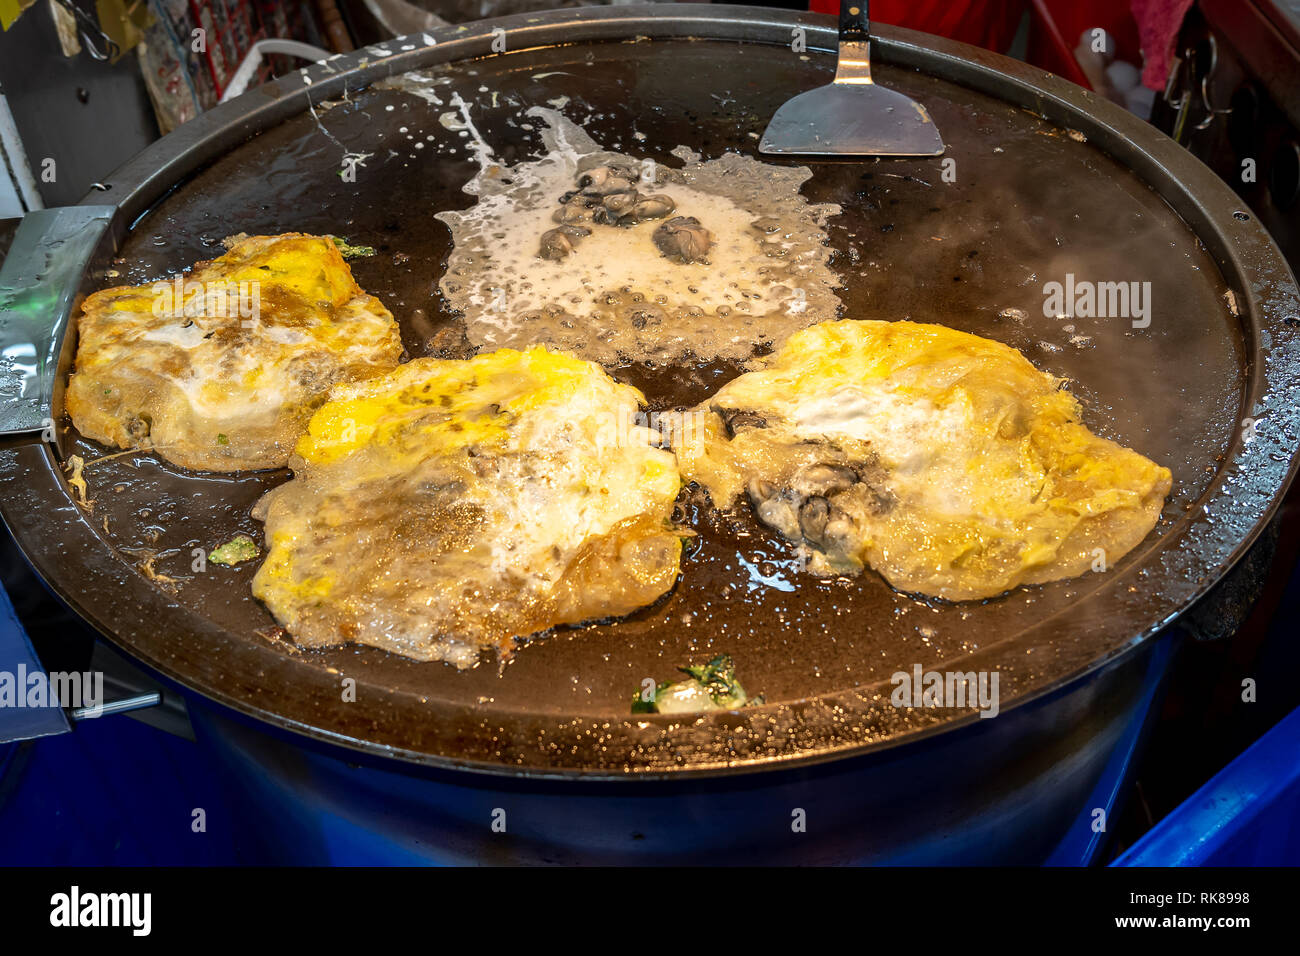 Taiwanese street foods - Oyster omelet  on the hot plate at a street food vendor in the night market in Taipei, Taiwan Stock Photo